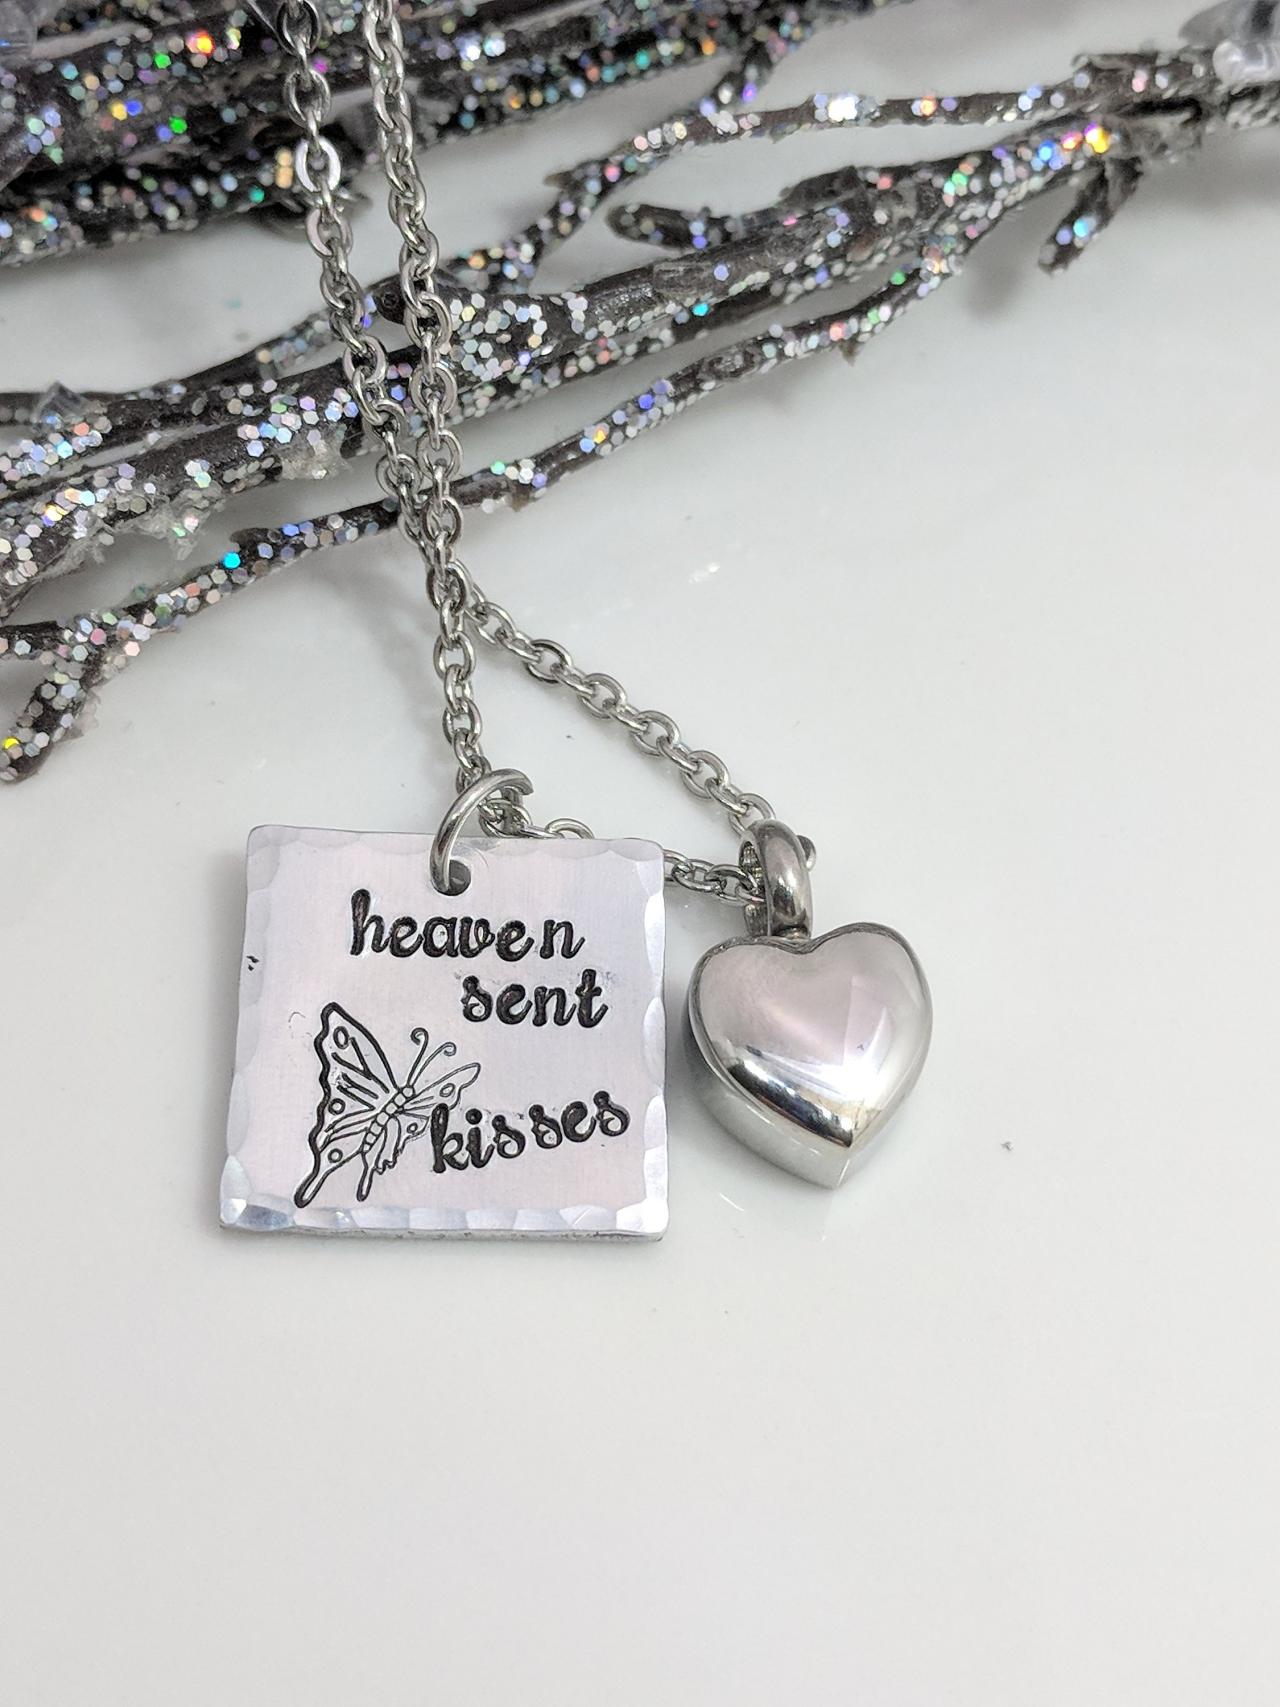 Heaven Sent Kisses Hand Stamped Necklace - Urn Hand Stamped Jewelry - Heart Urn - Ashes Holder - Urn For Ashes - Butterfly Kisses - Loss Of Mom -